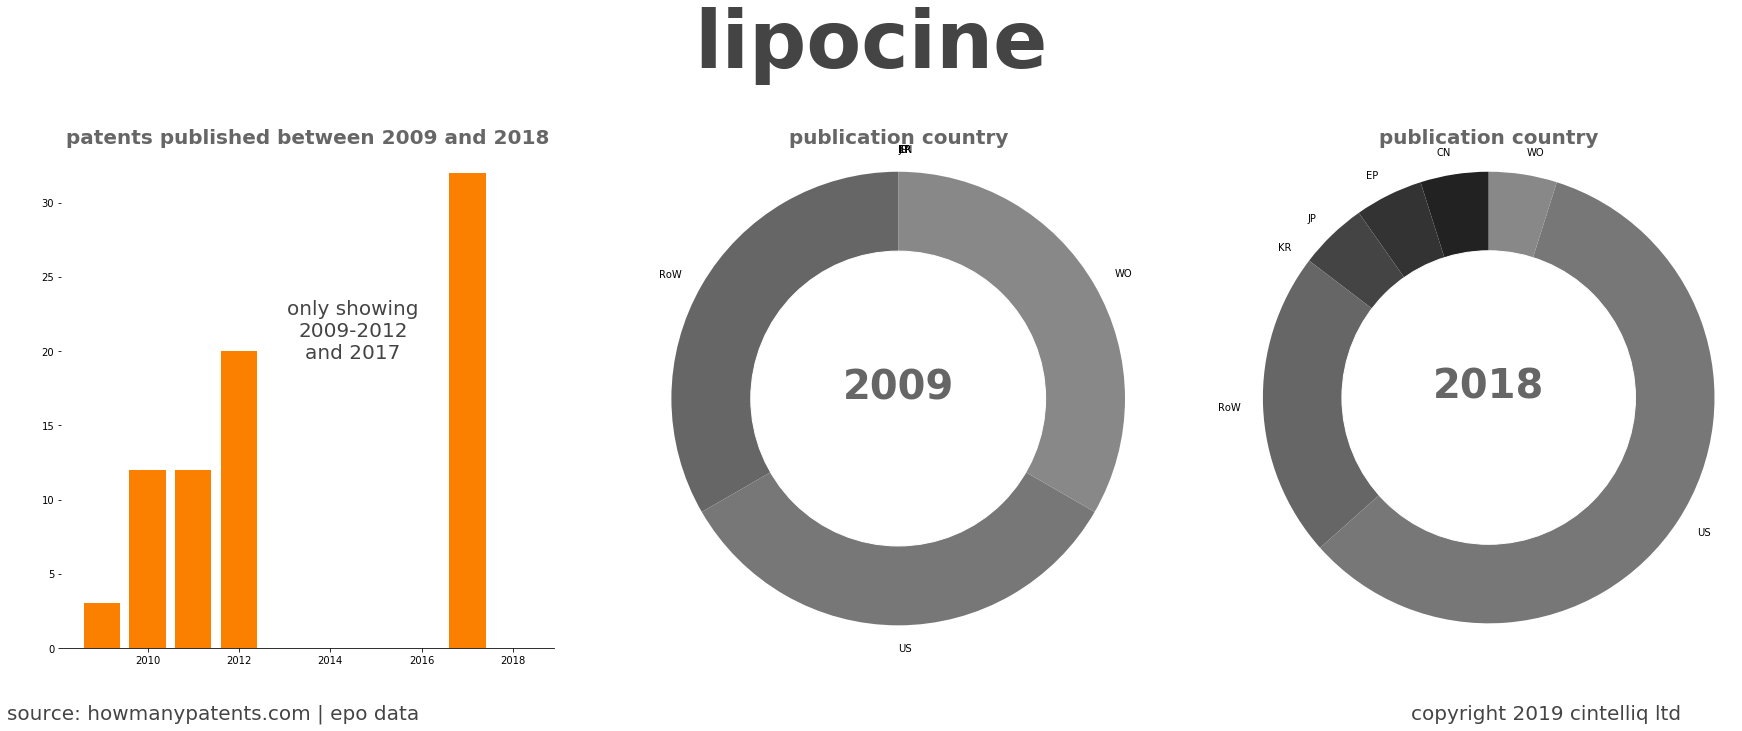 summary of patents for Lipocine